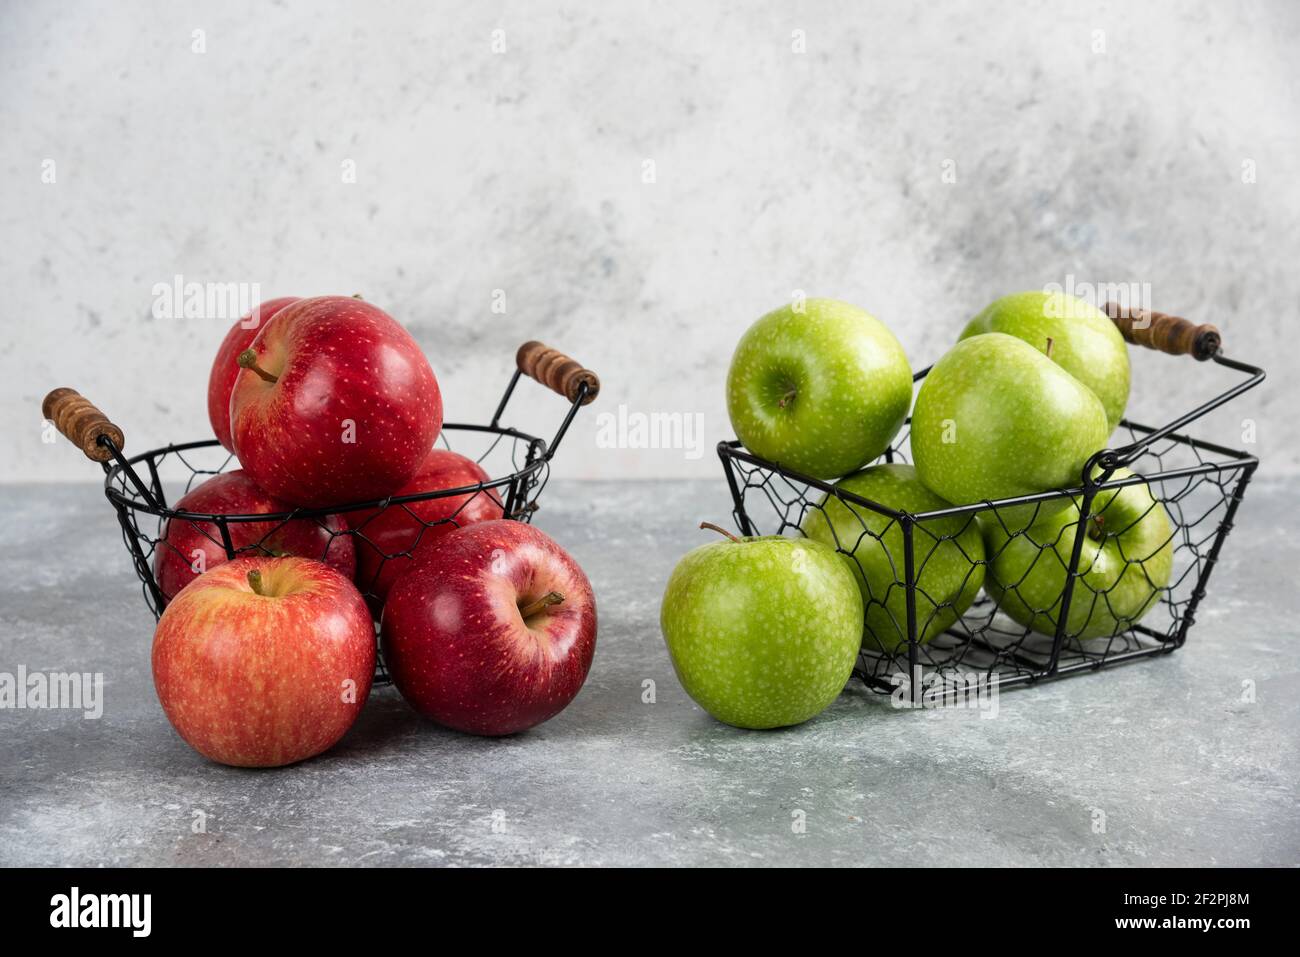 Pile of fresh green and red apples placed in metal baskets Stock Photo